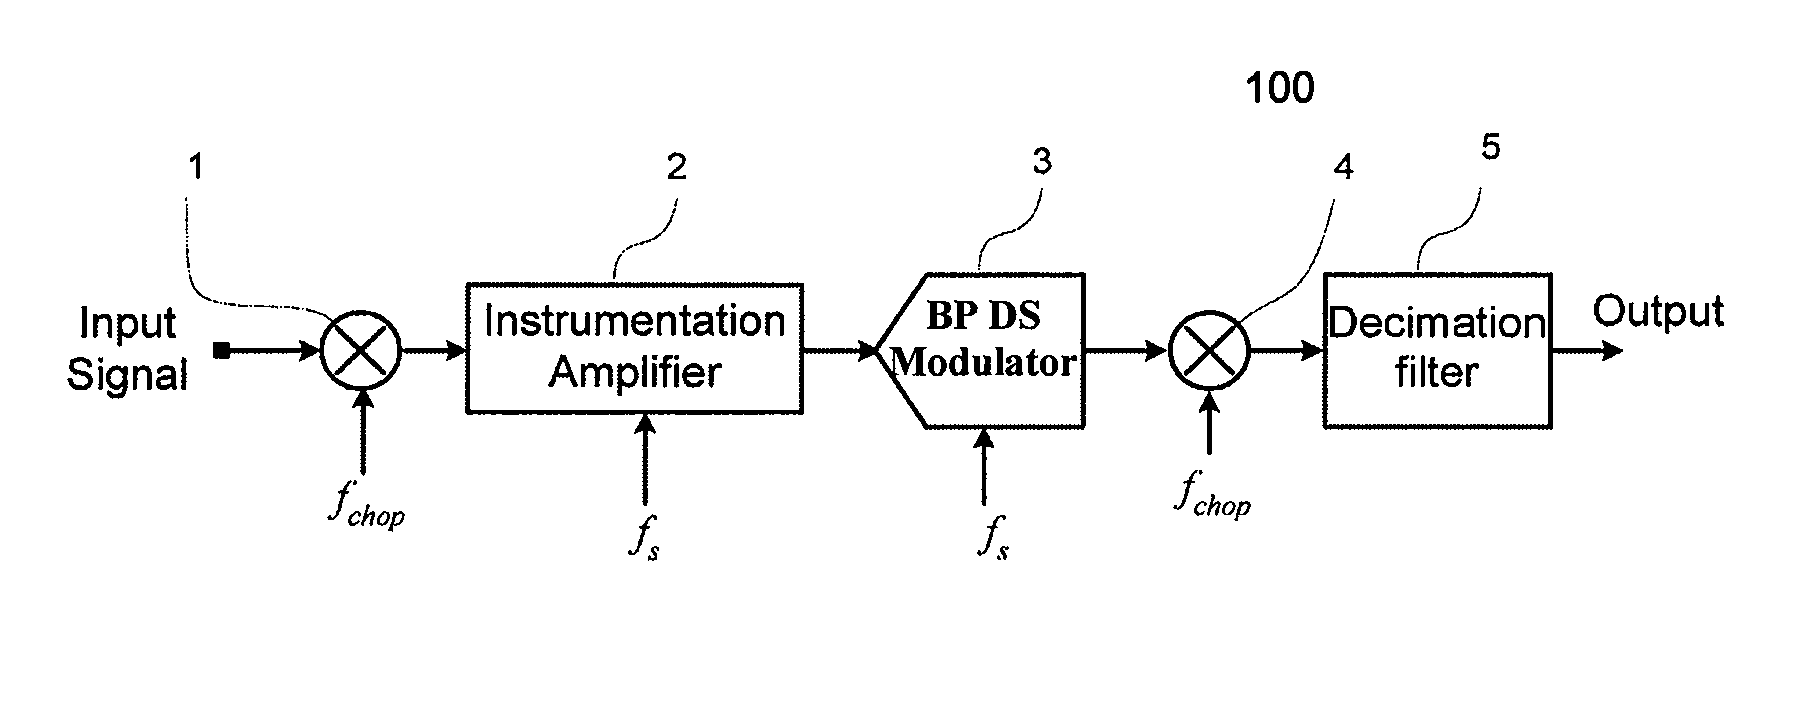 Sensor interface devices and amplifiers